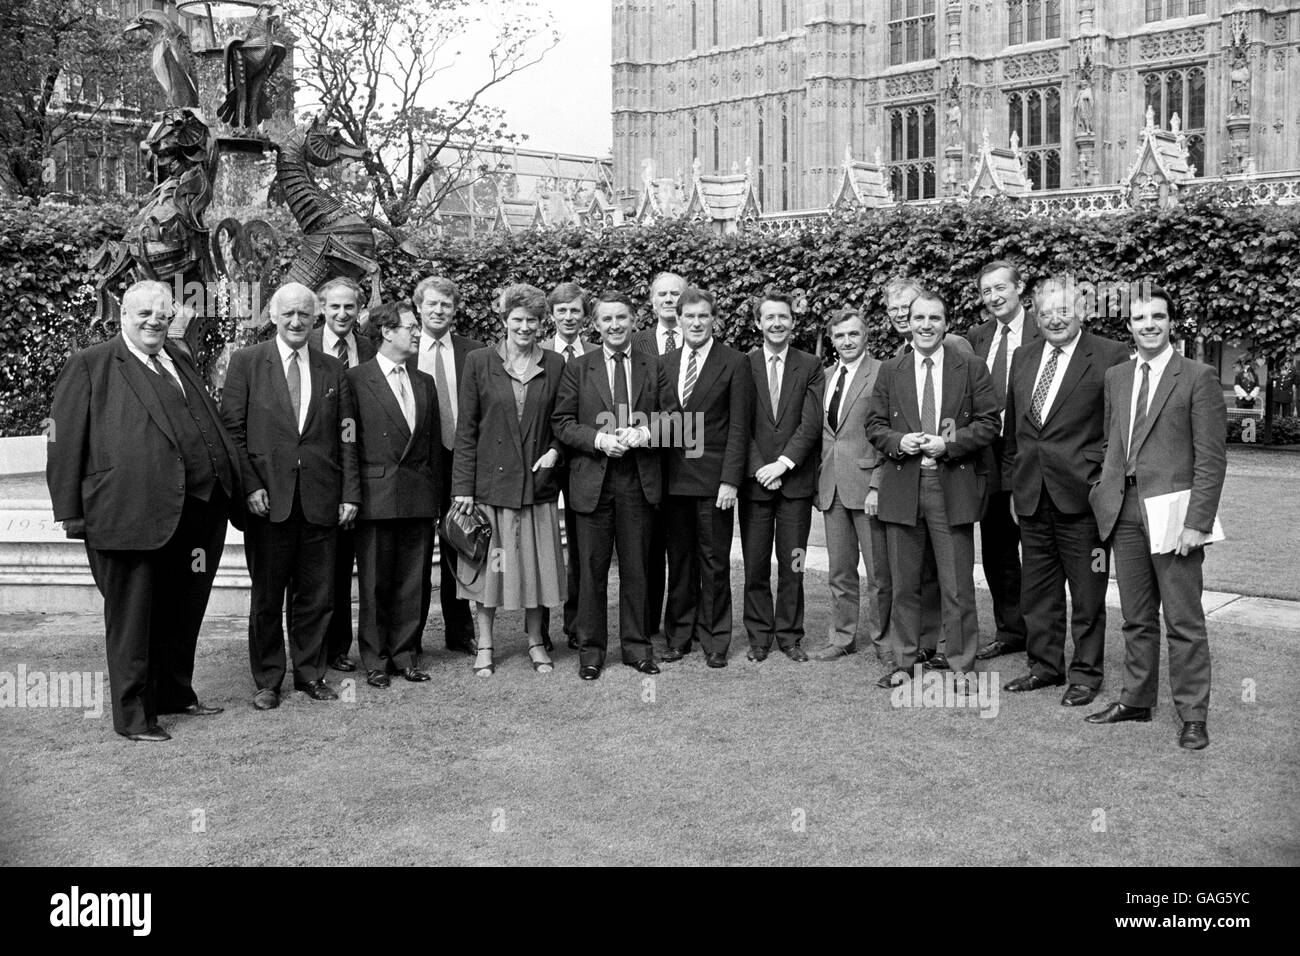 The seventeen Liberal MPs elected outside the House of Commons. From the left, Cyril Smith, Sir Russell Johnston, Alex Carlile, Alan Beith, Paddy Ashdown, Ray Mitchy, Archy Kirkwood, David Steel, Menzies Campbell, Ronald Fern, David Alton, Malcom Bruce, Simon Hughes, Jim Wallace, Richard Livsey, Geraint Howells and Matthew Taylor. Stock Photo